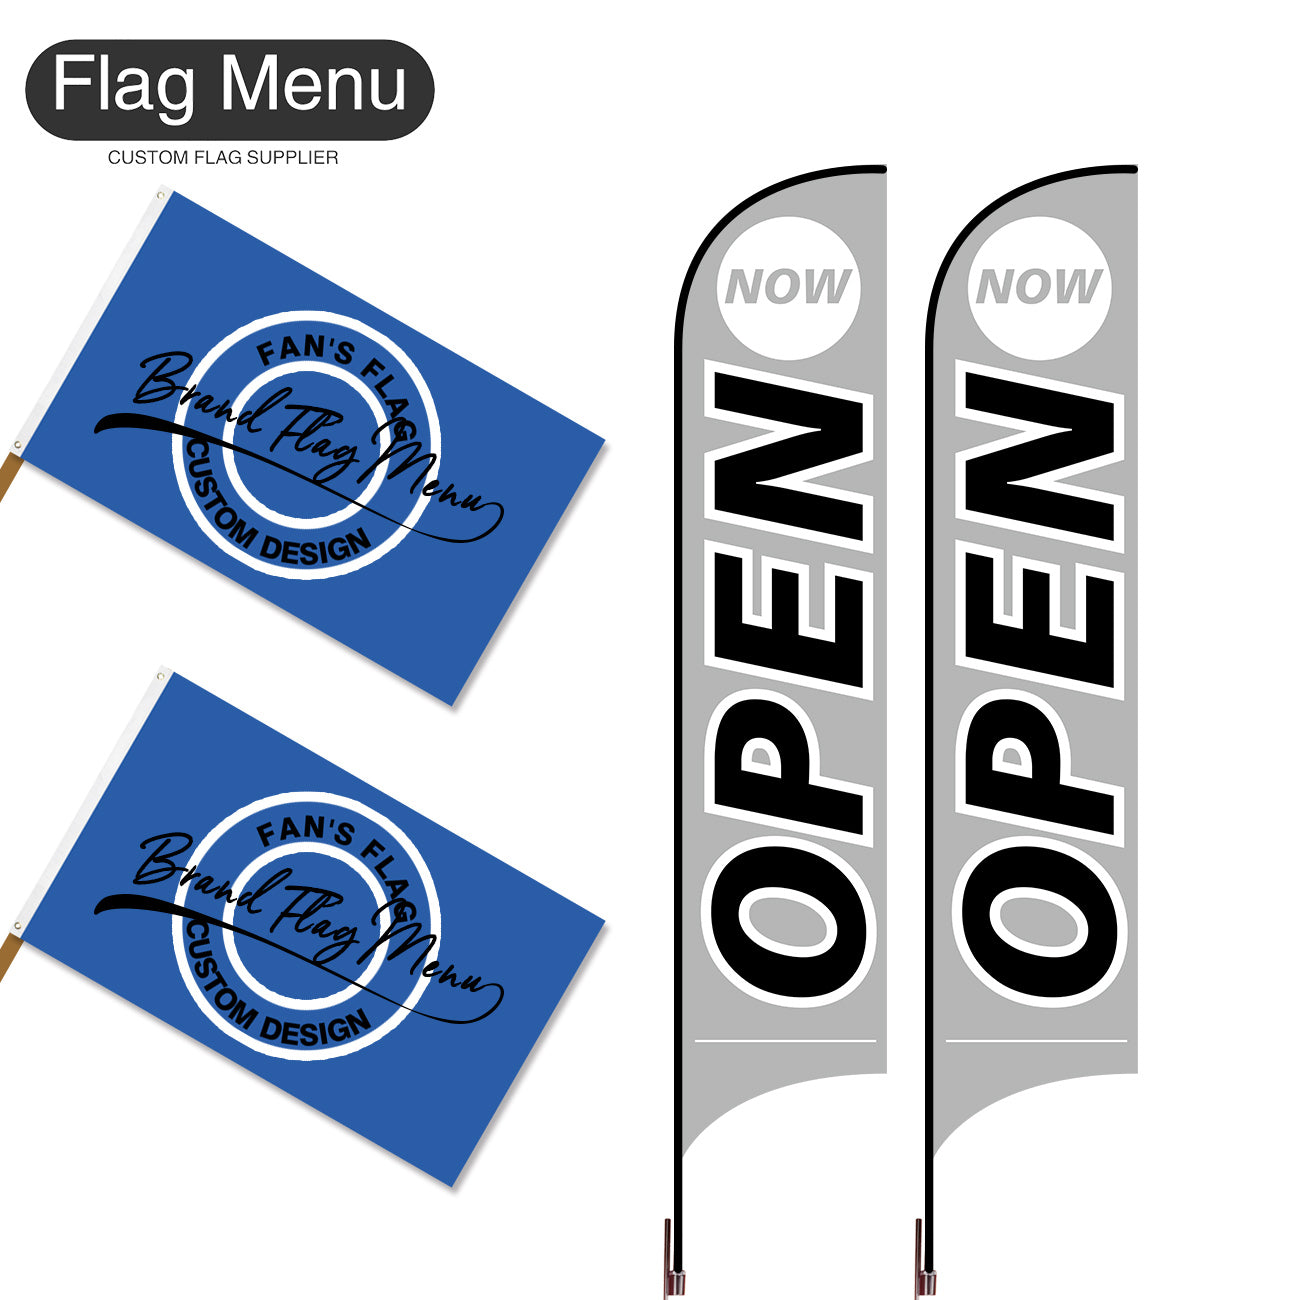 Outdoor Advertising Set - B-Grey-S - Feather Flag -Double Sided & 3'x5' Regular Flag -Single Sided-Cross & Water Bag-Flag Menu